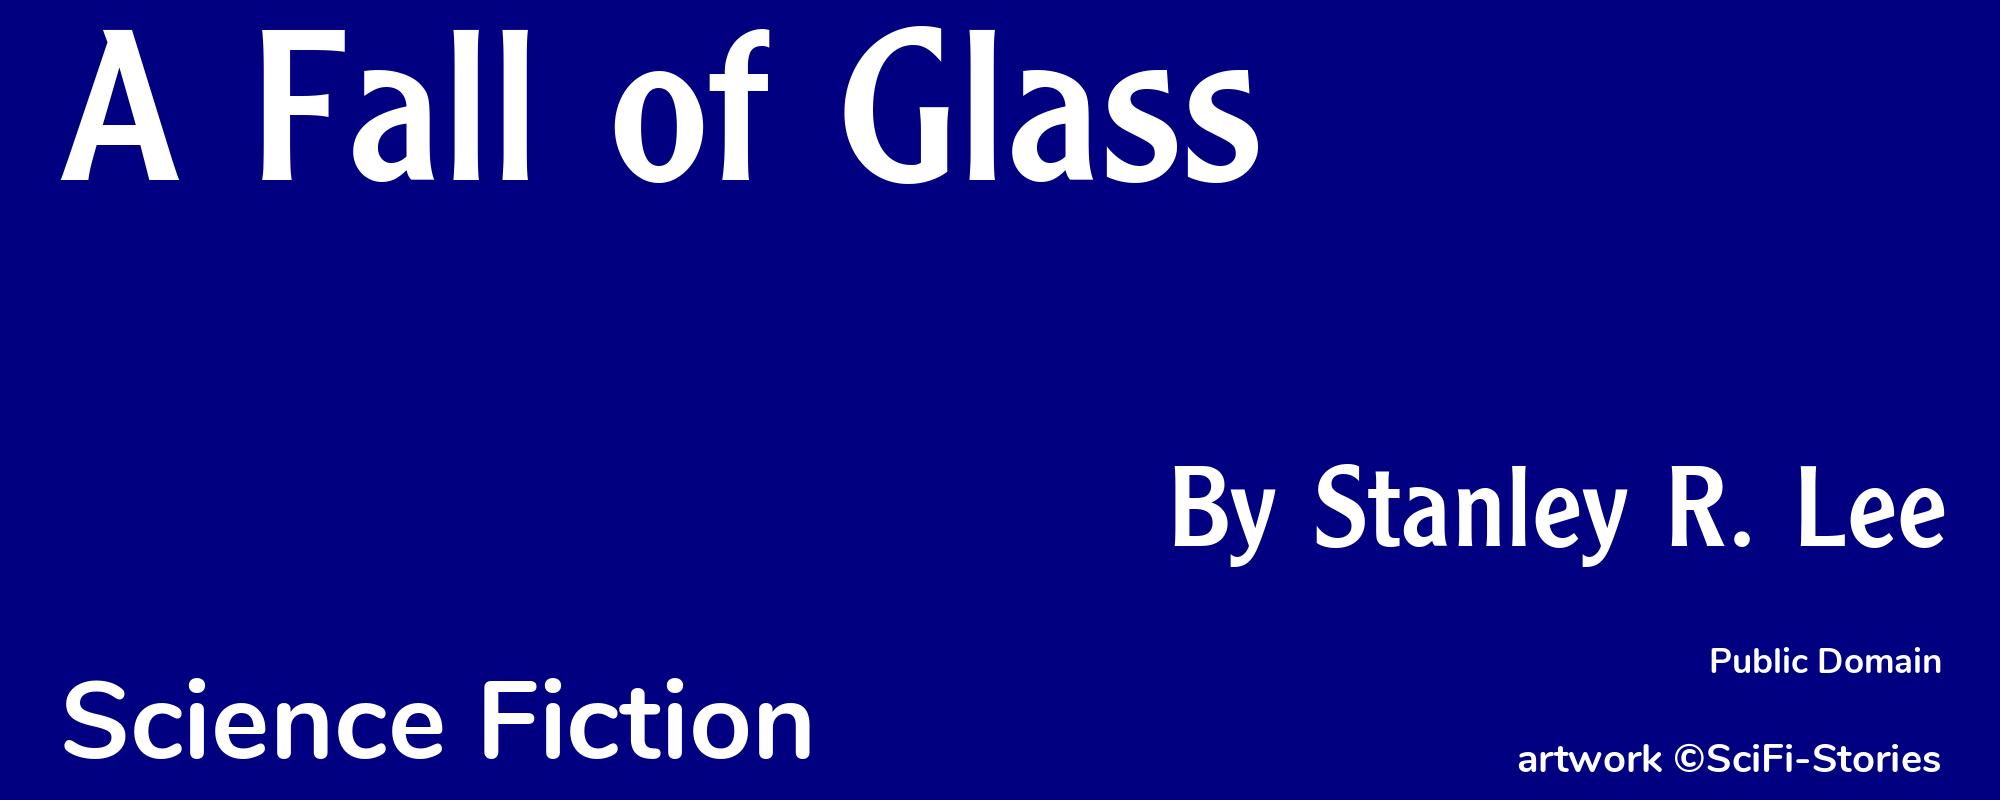 A Fall of Glass - Cover